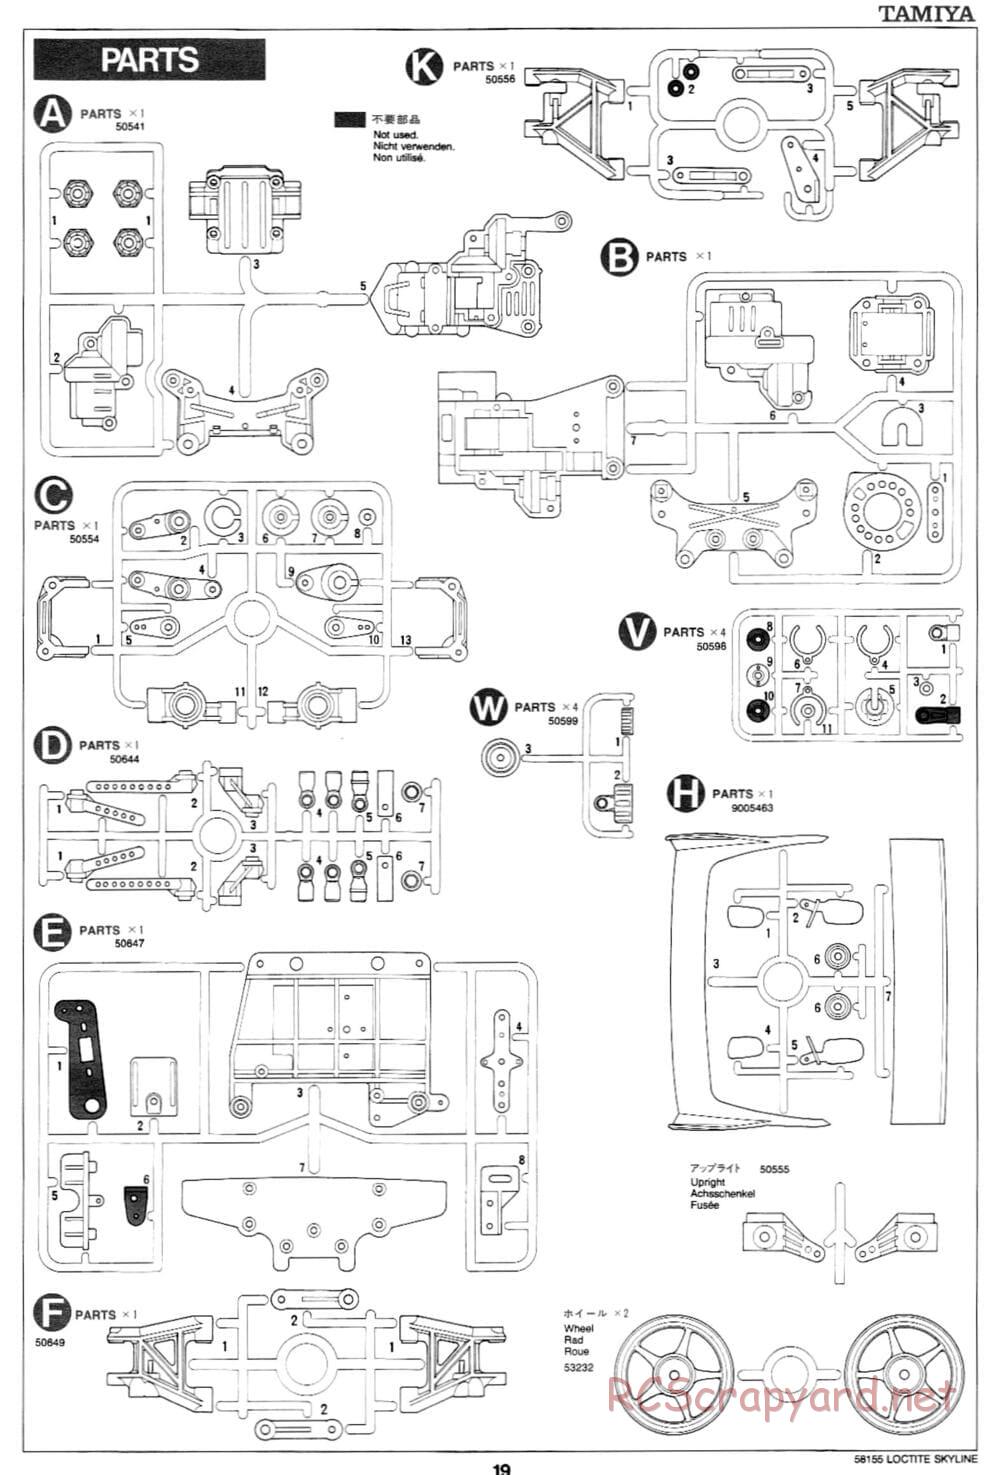 Tamiya - Loctite Nissan Skyline GT-R N1 - TA-02 Chassis - Manual - Page 20